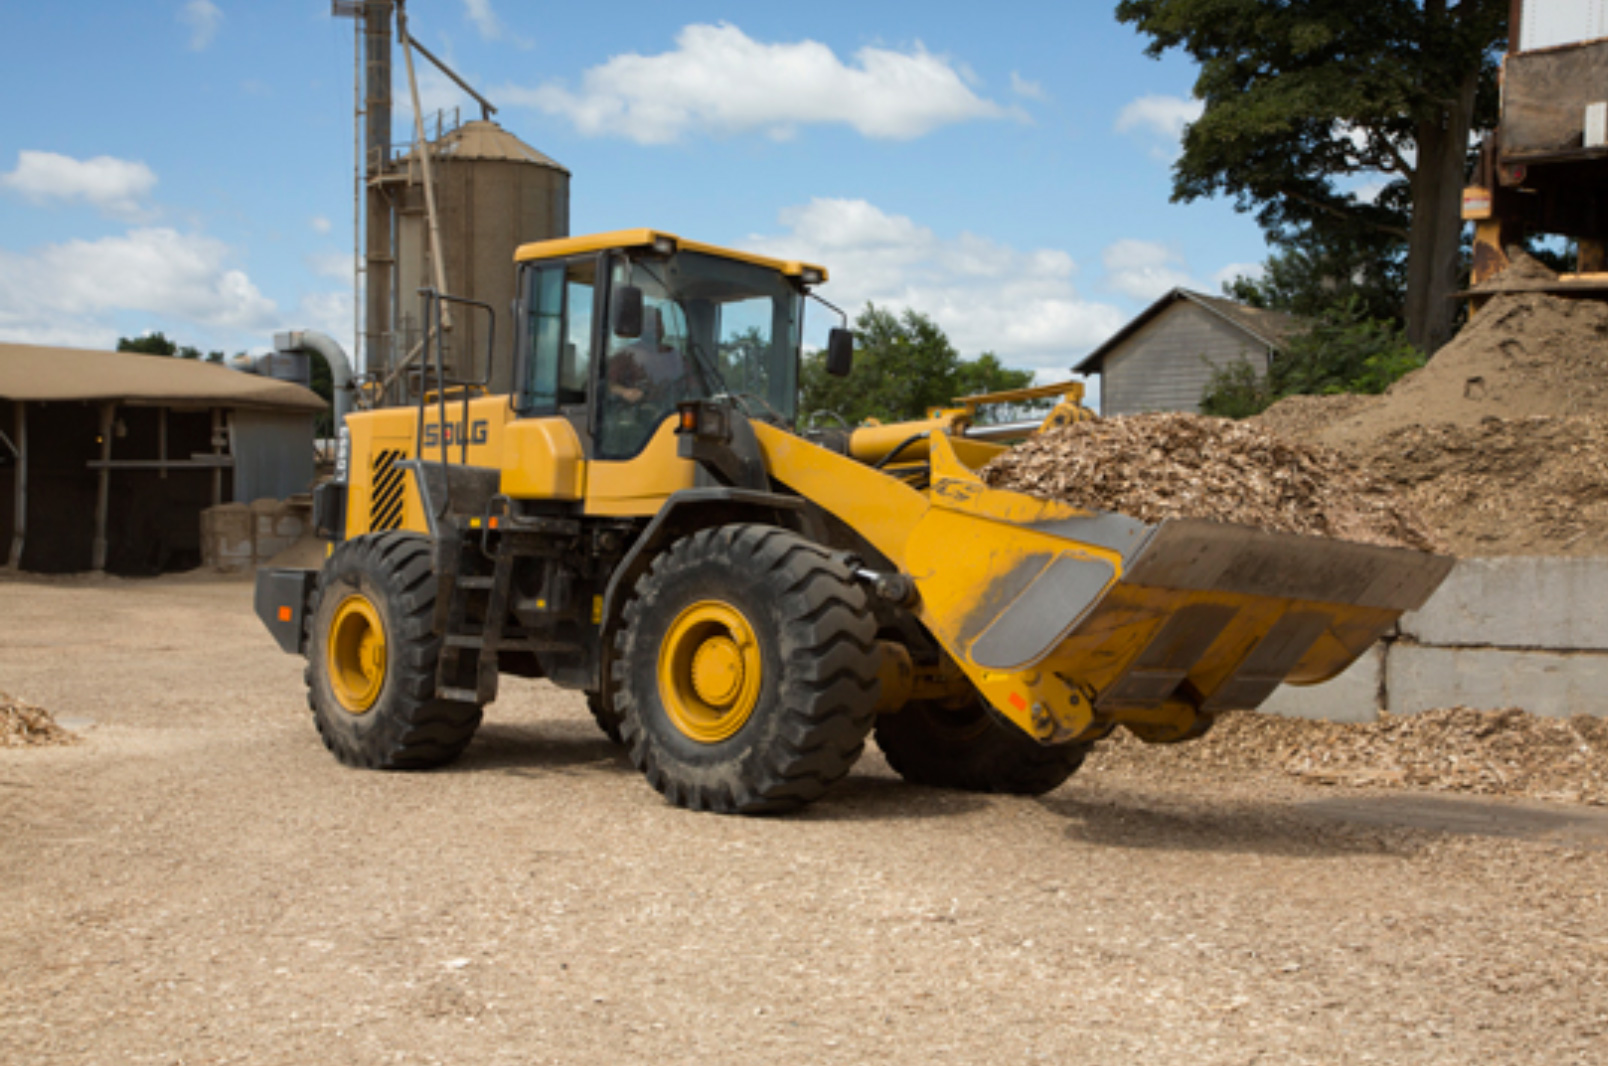 PA Pellets boosts productivity with SDLG loader